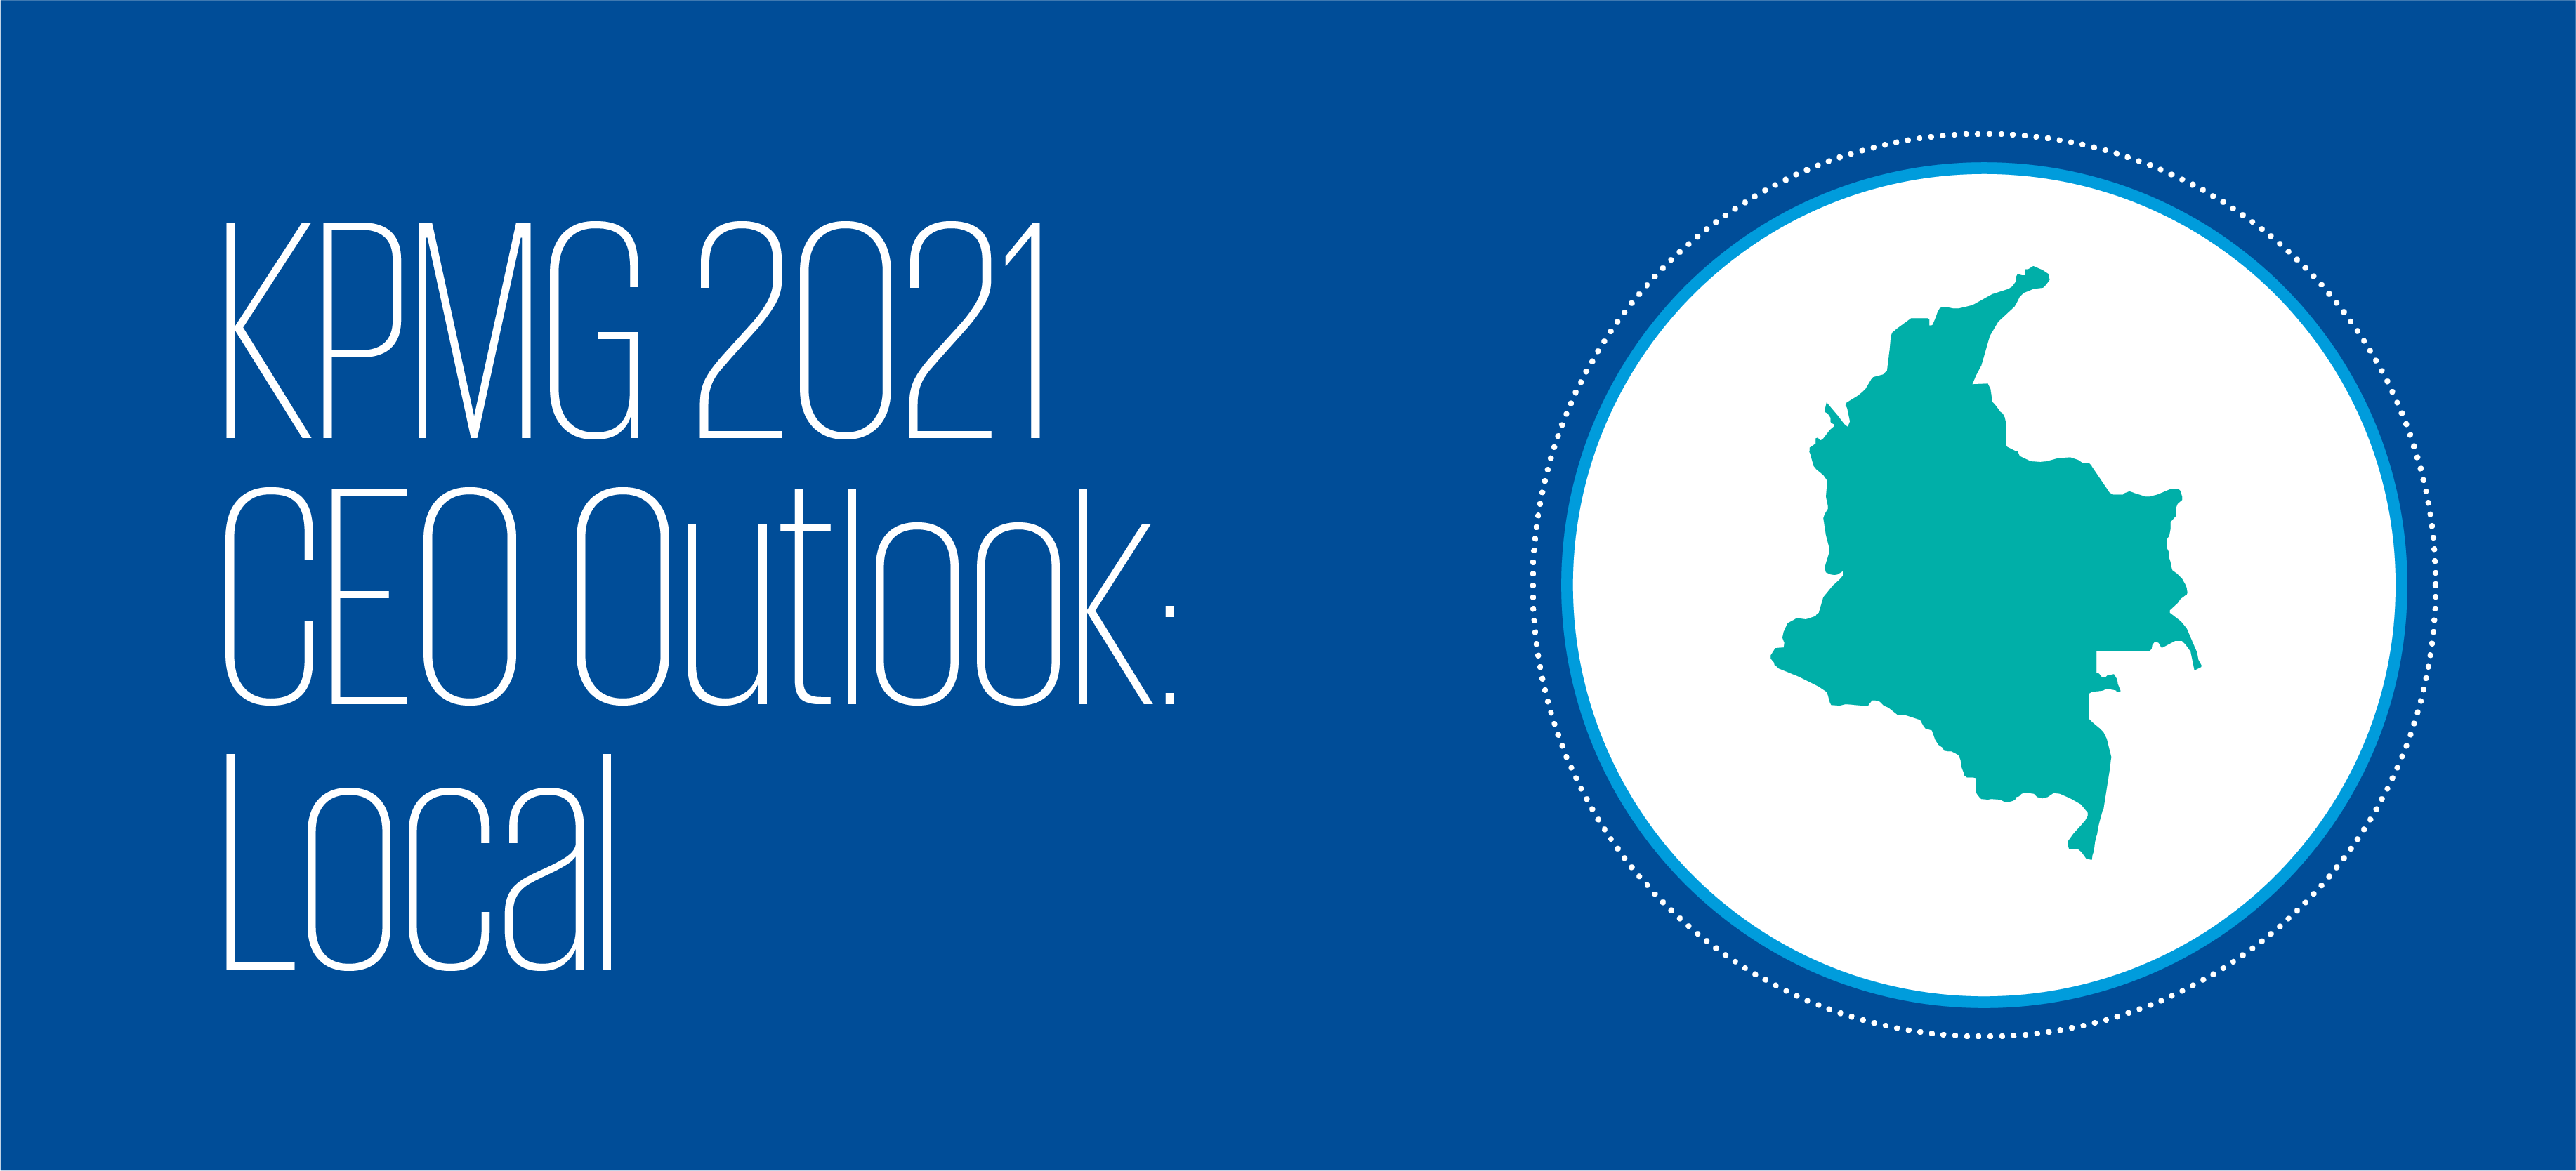 KPMG 2021 CEO Outlook